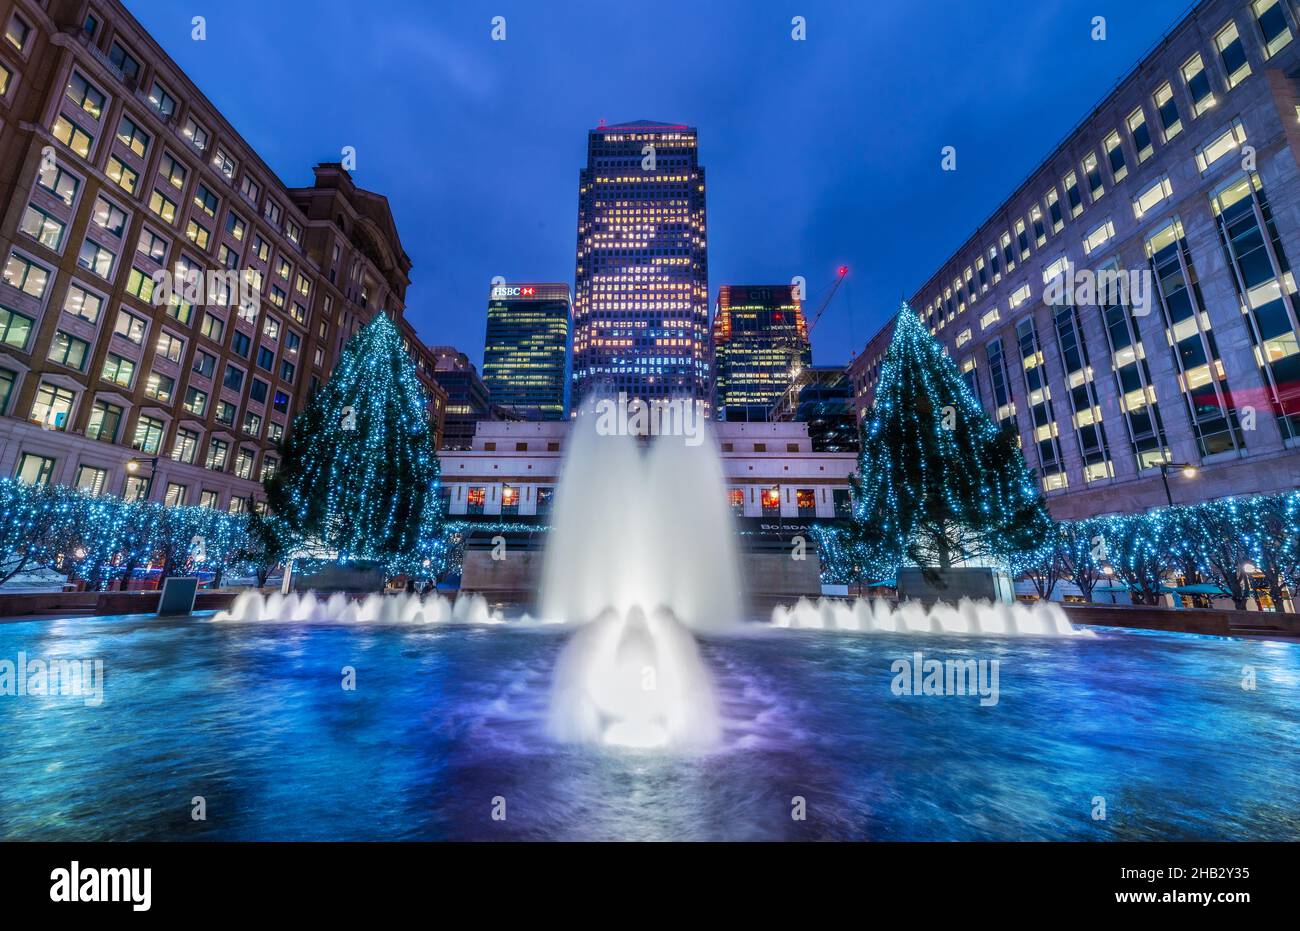 London, England, UK - December 15, 2021: Wide view of the Cabot Square and artistic fountain illuminated in evening lights, surrounded by Christmas de Stock Photo